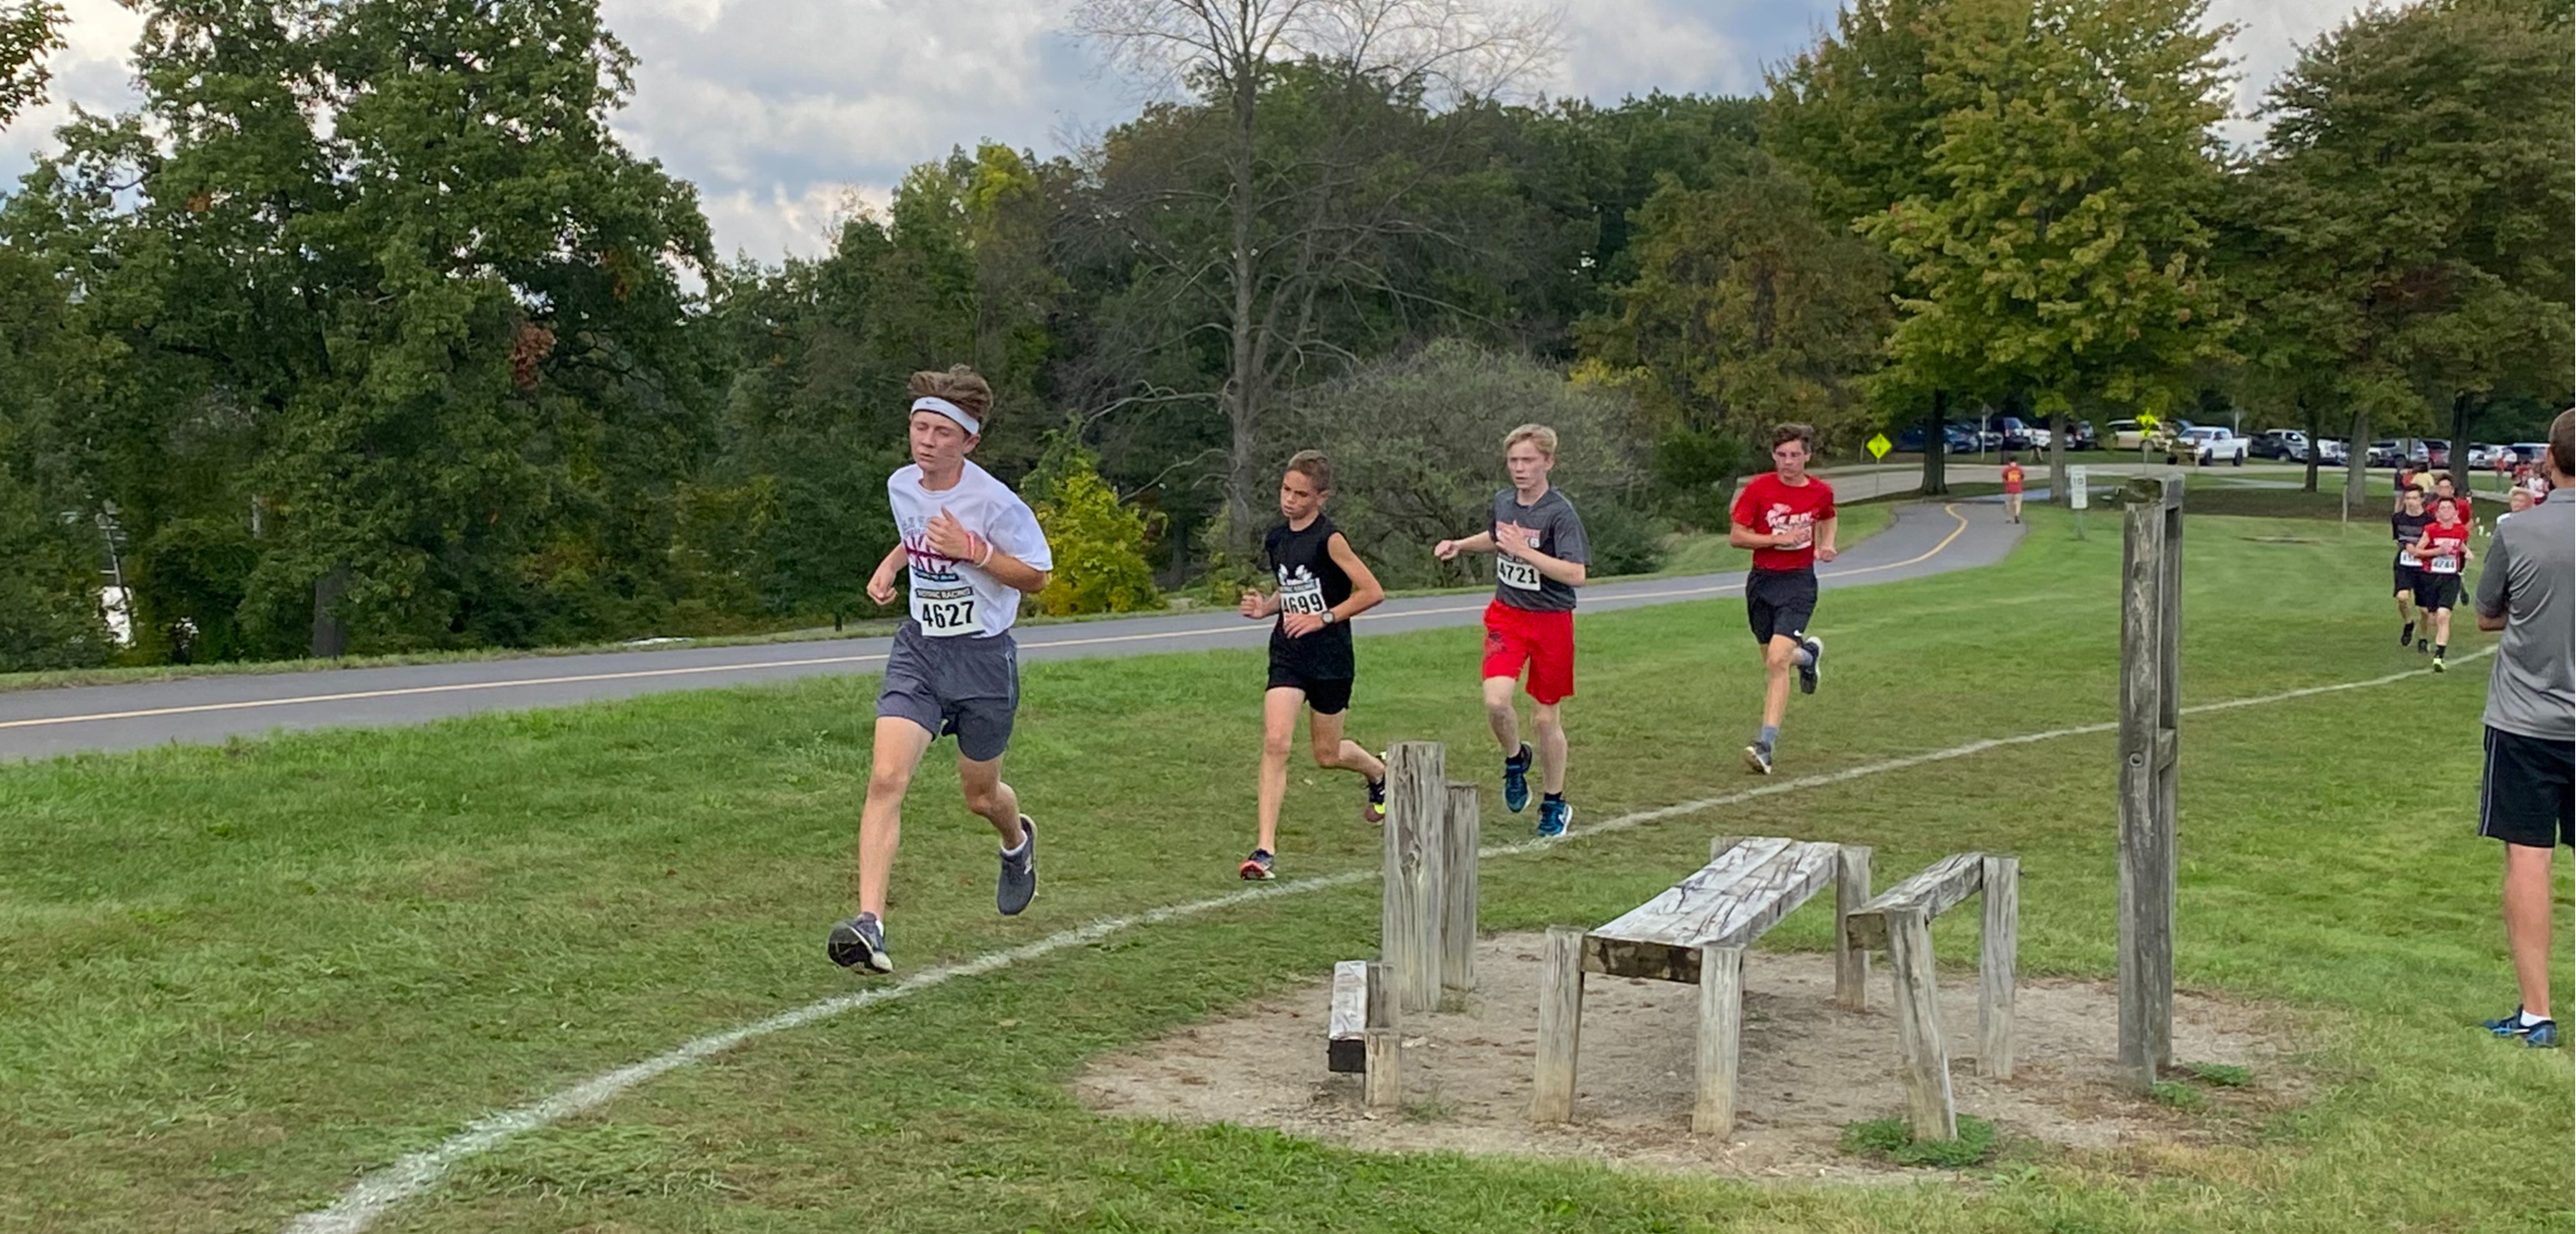 Cross Country runners in race